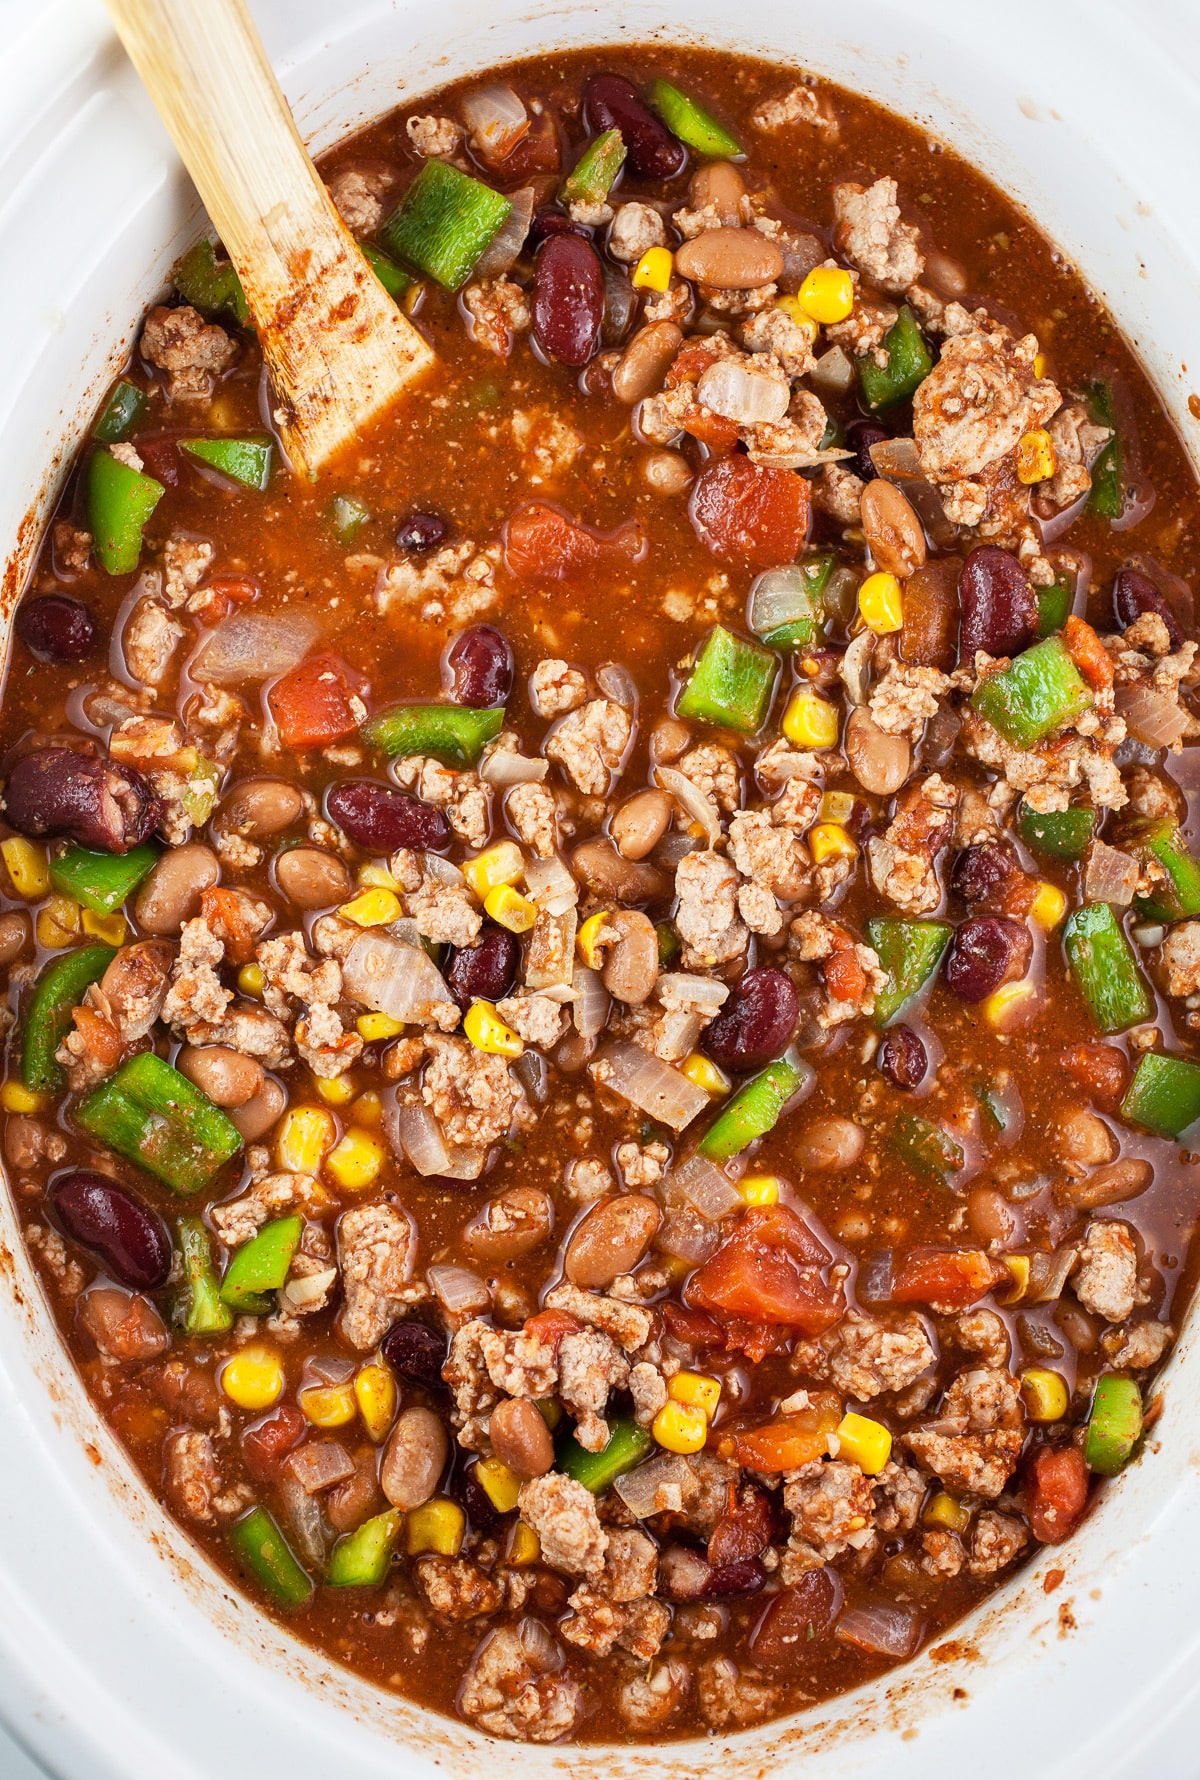 Uncooked ground turkey chili in slow cooker.